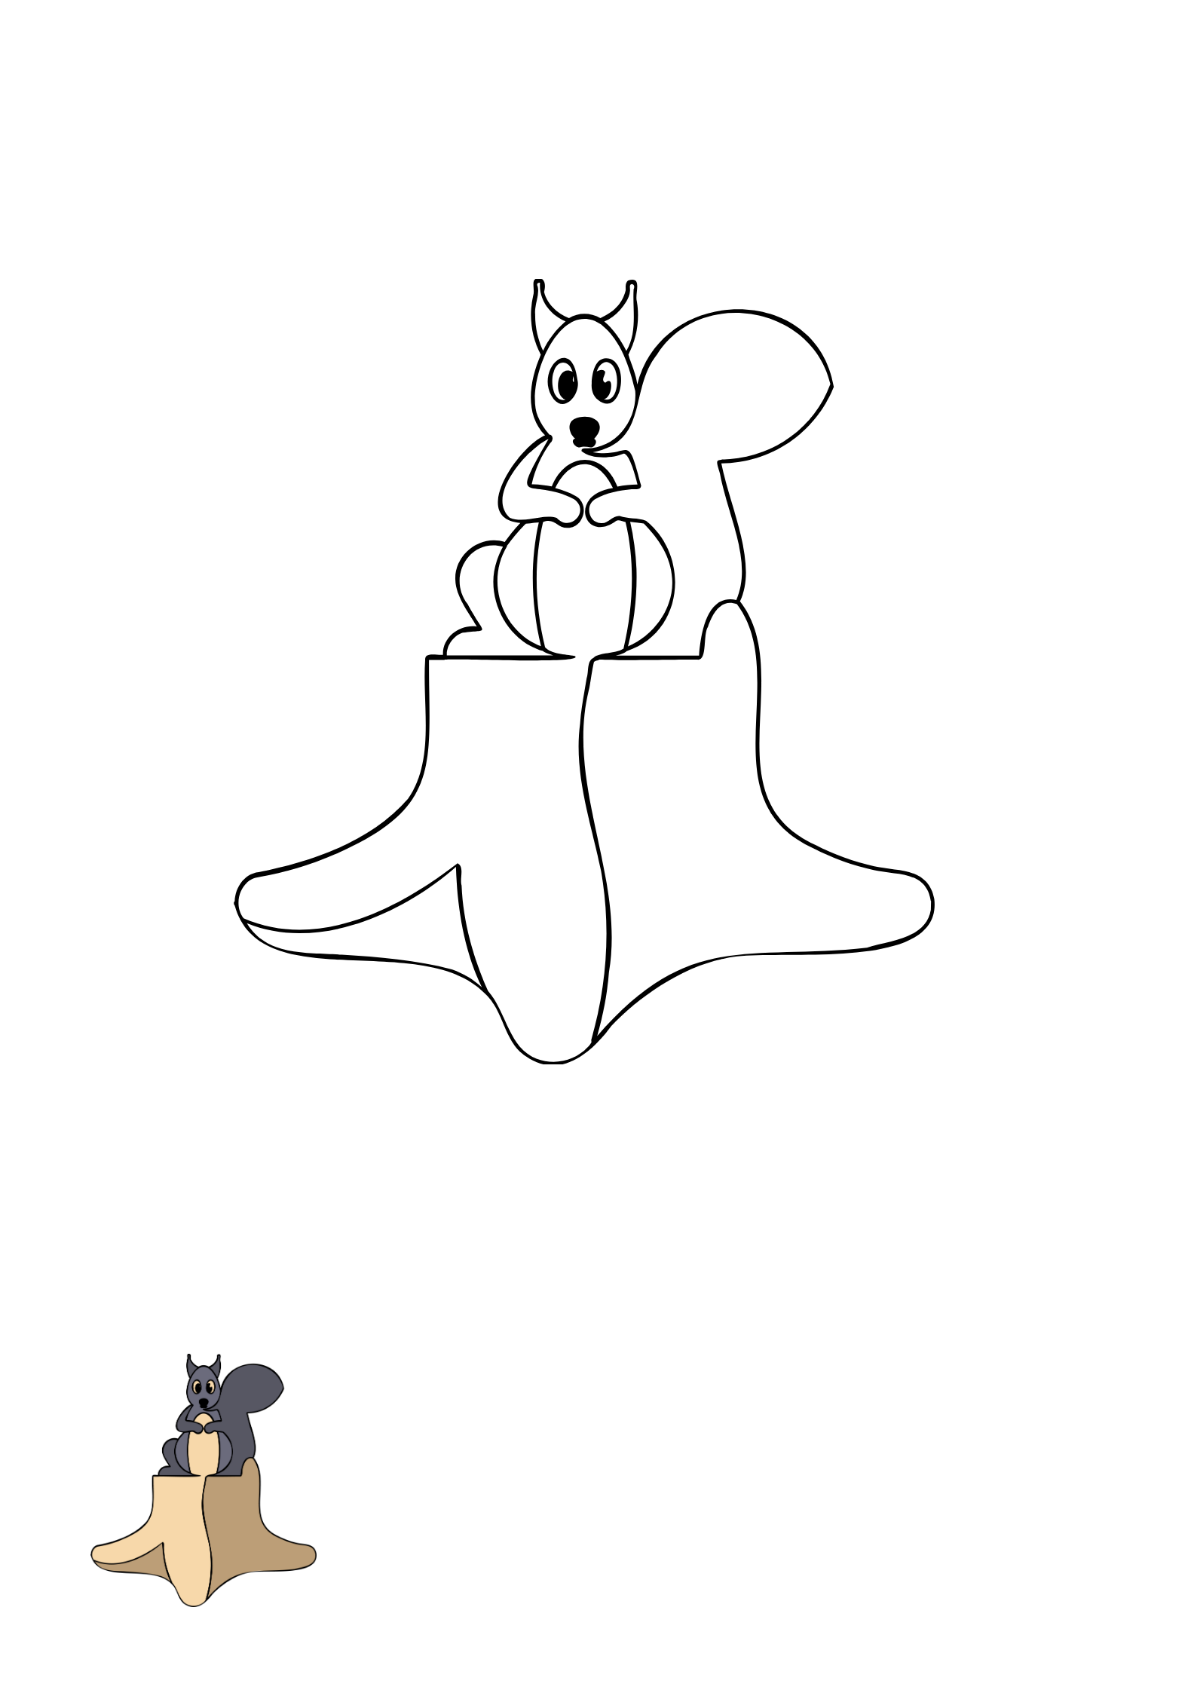 Squirrel on Tree Stumps Coloring Page Template